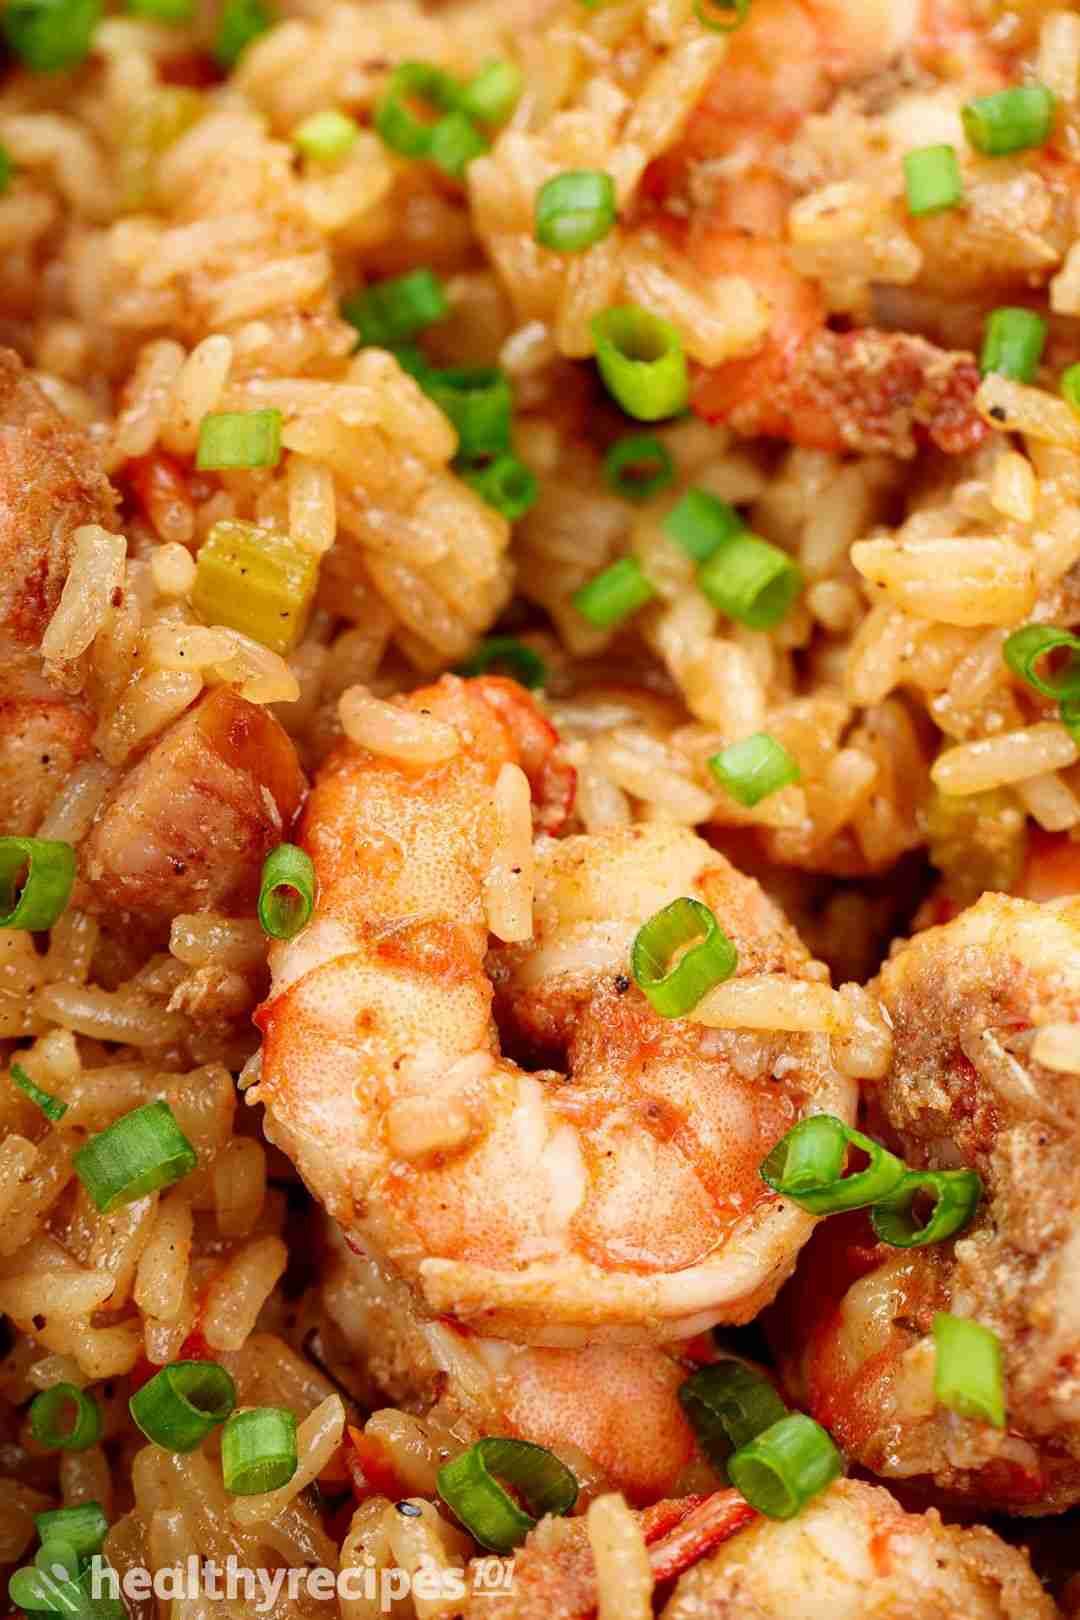 Shrimp Biryani Recipe: A Family-Friendly Curry With Delicate Flavors